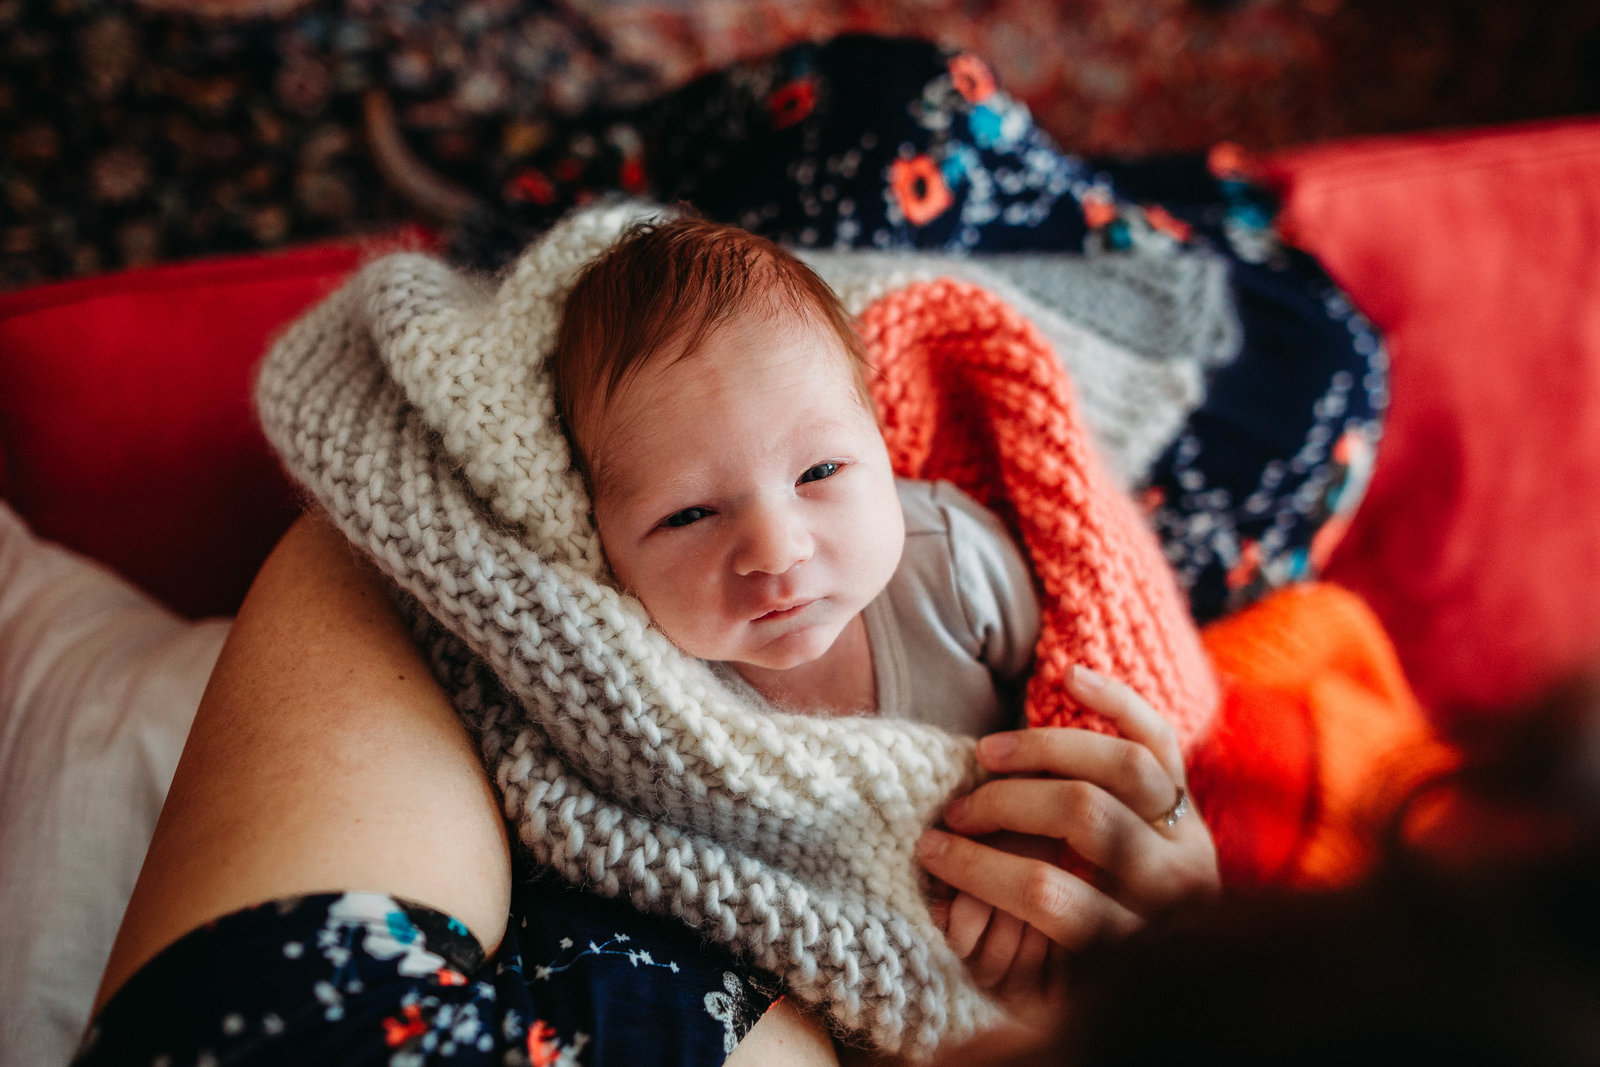 redheaded newborn baby wrapped in colorful knit blanket during cambridge newborn session